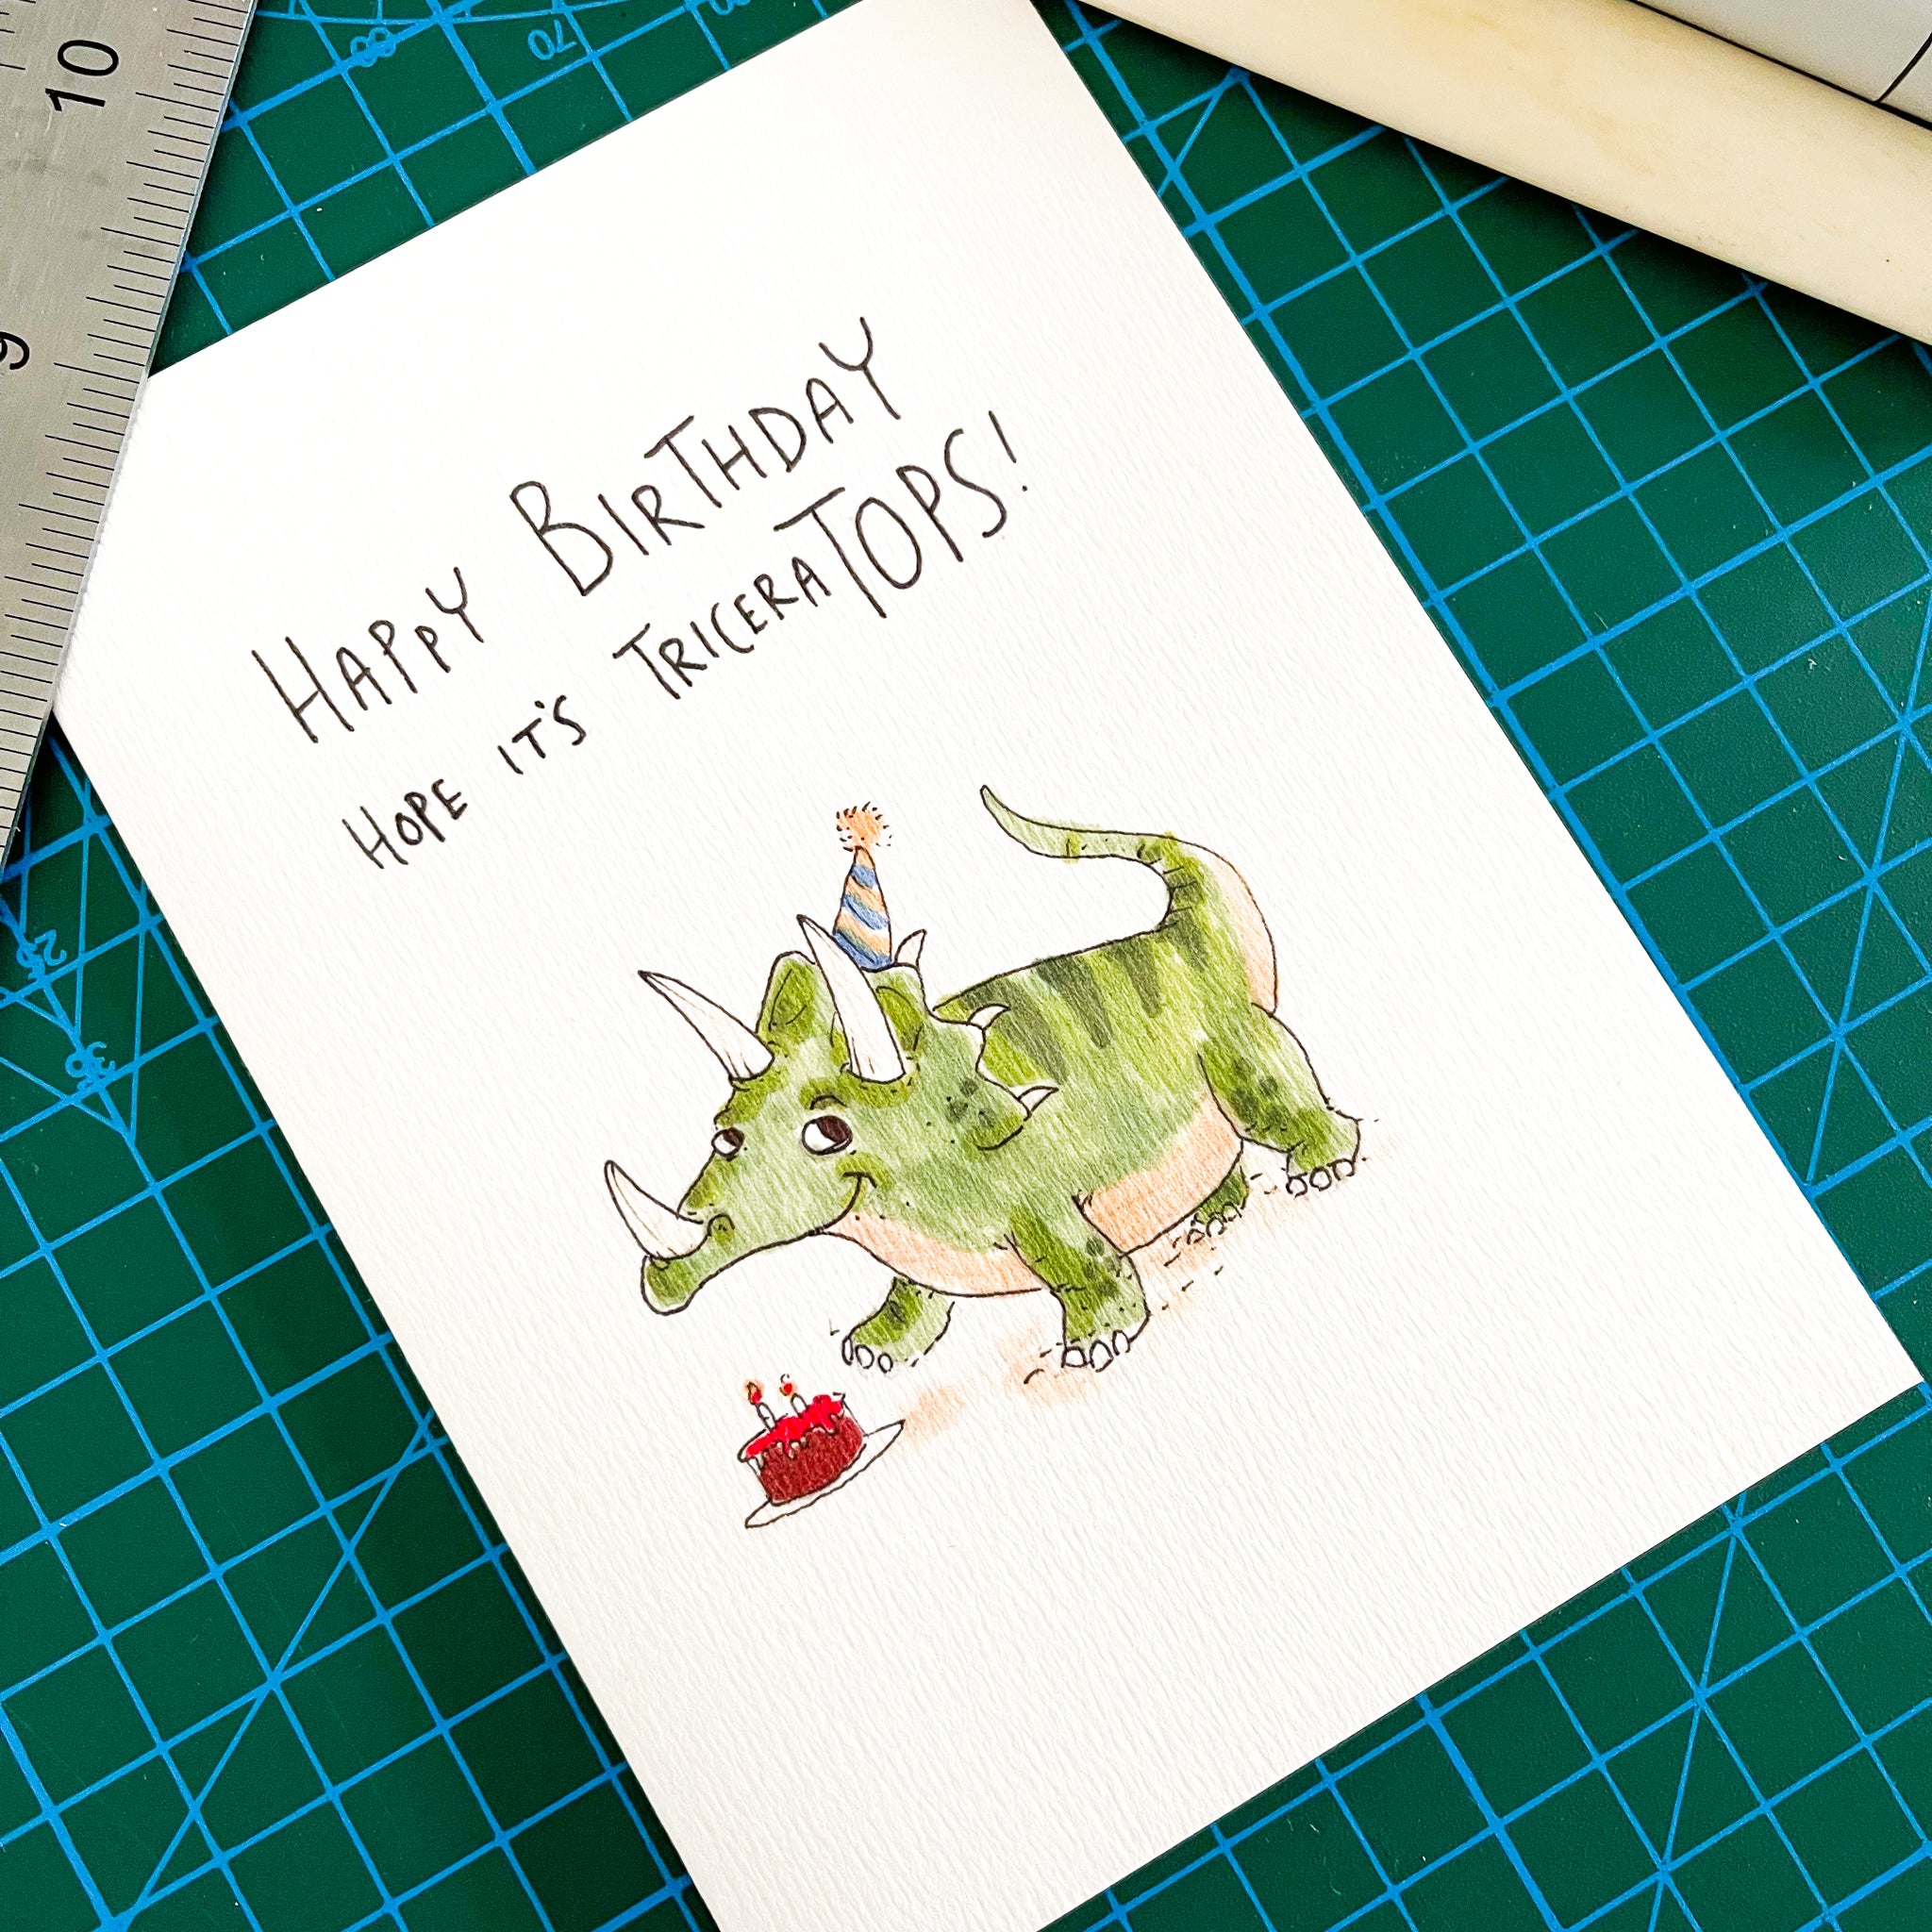 Happy Birthday, Hope It's TriceraTops - Well Drawn